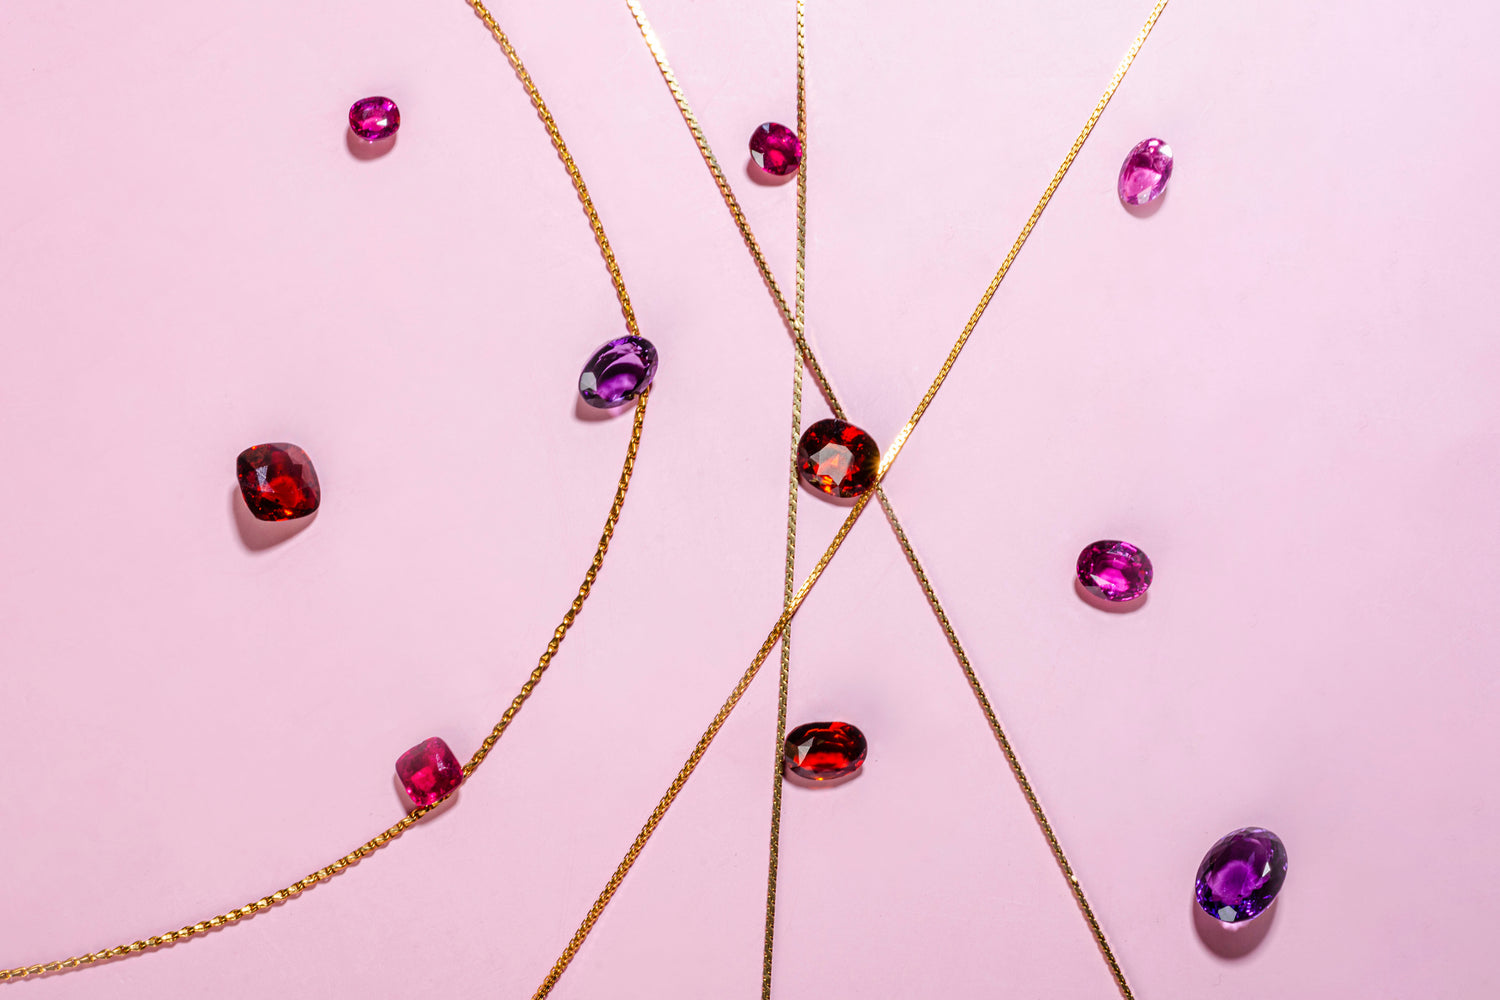 gemstones and gold chains on a pink background